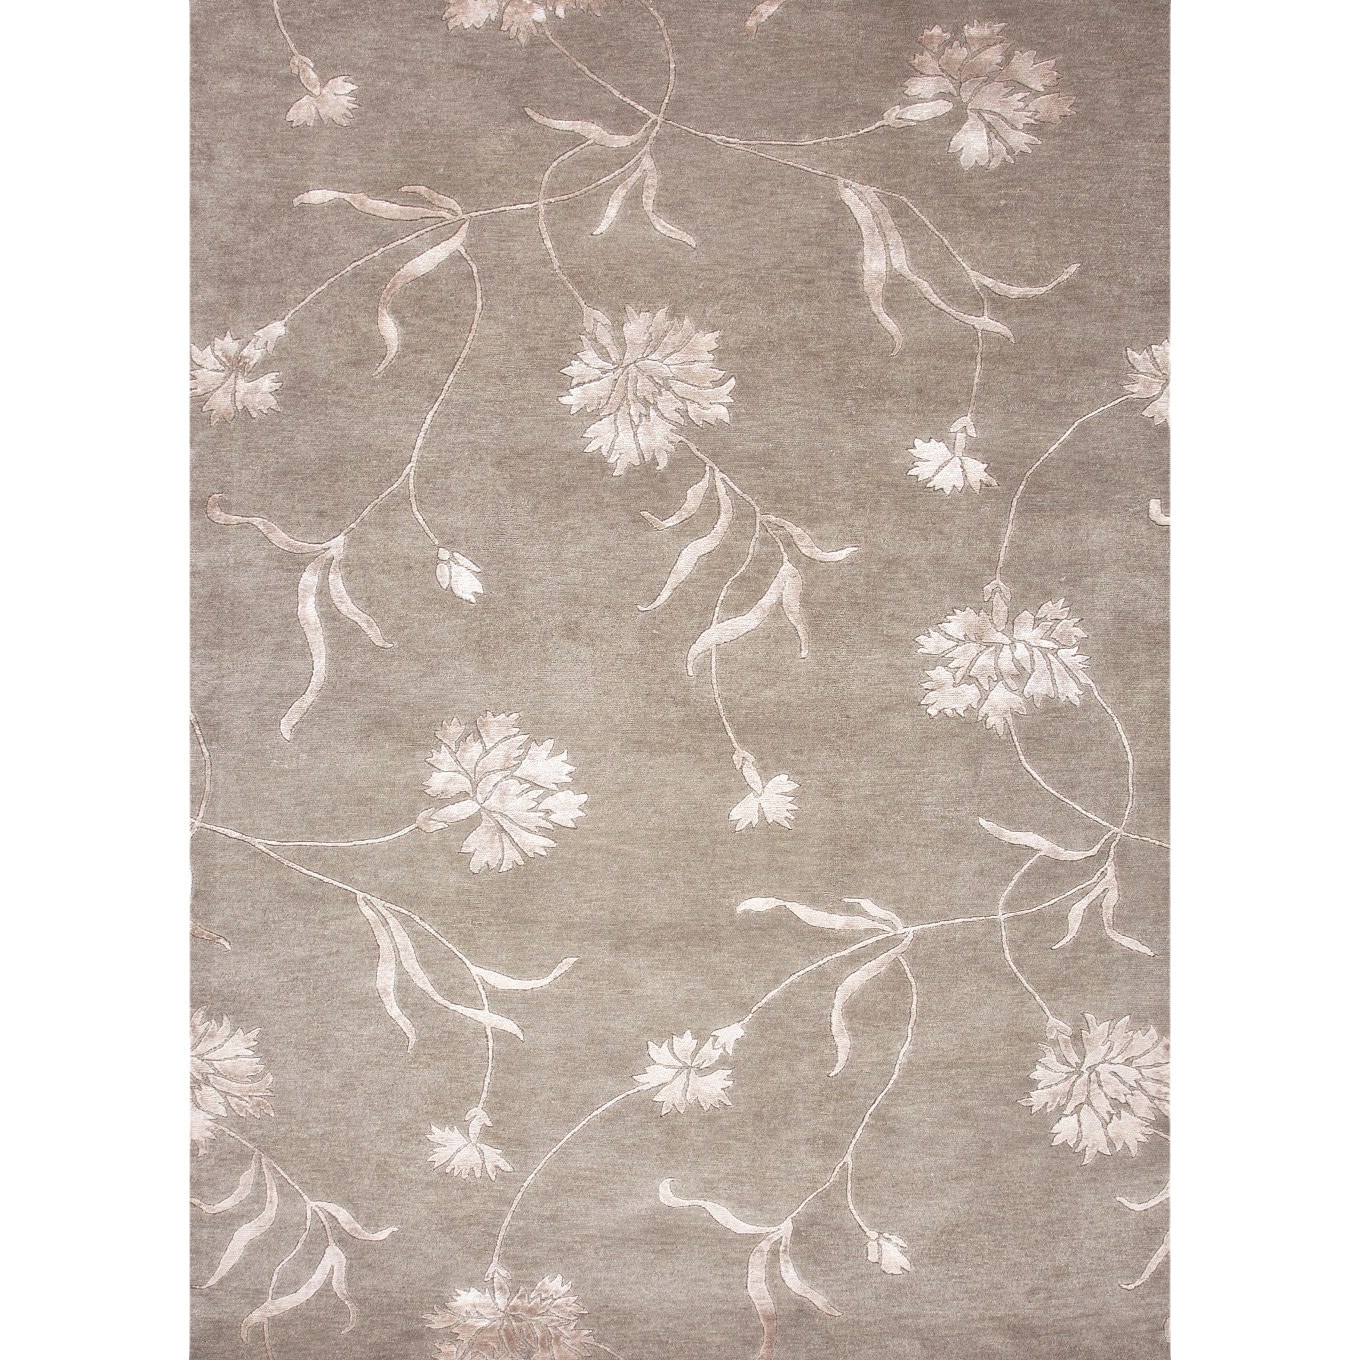 Hand knotted Gray/ Black Floral Pattern Wool/ Silk Rug (36 X 56)